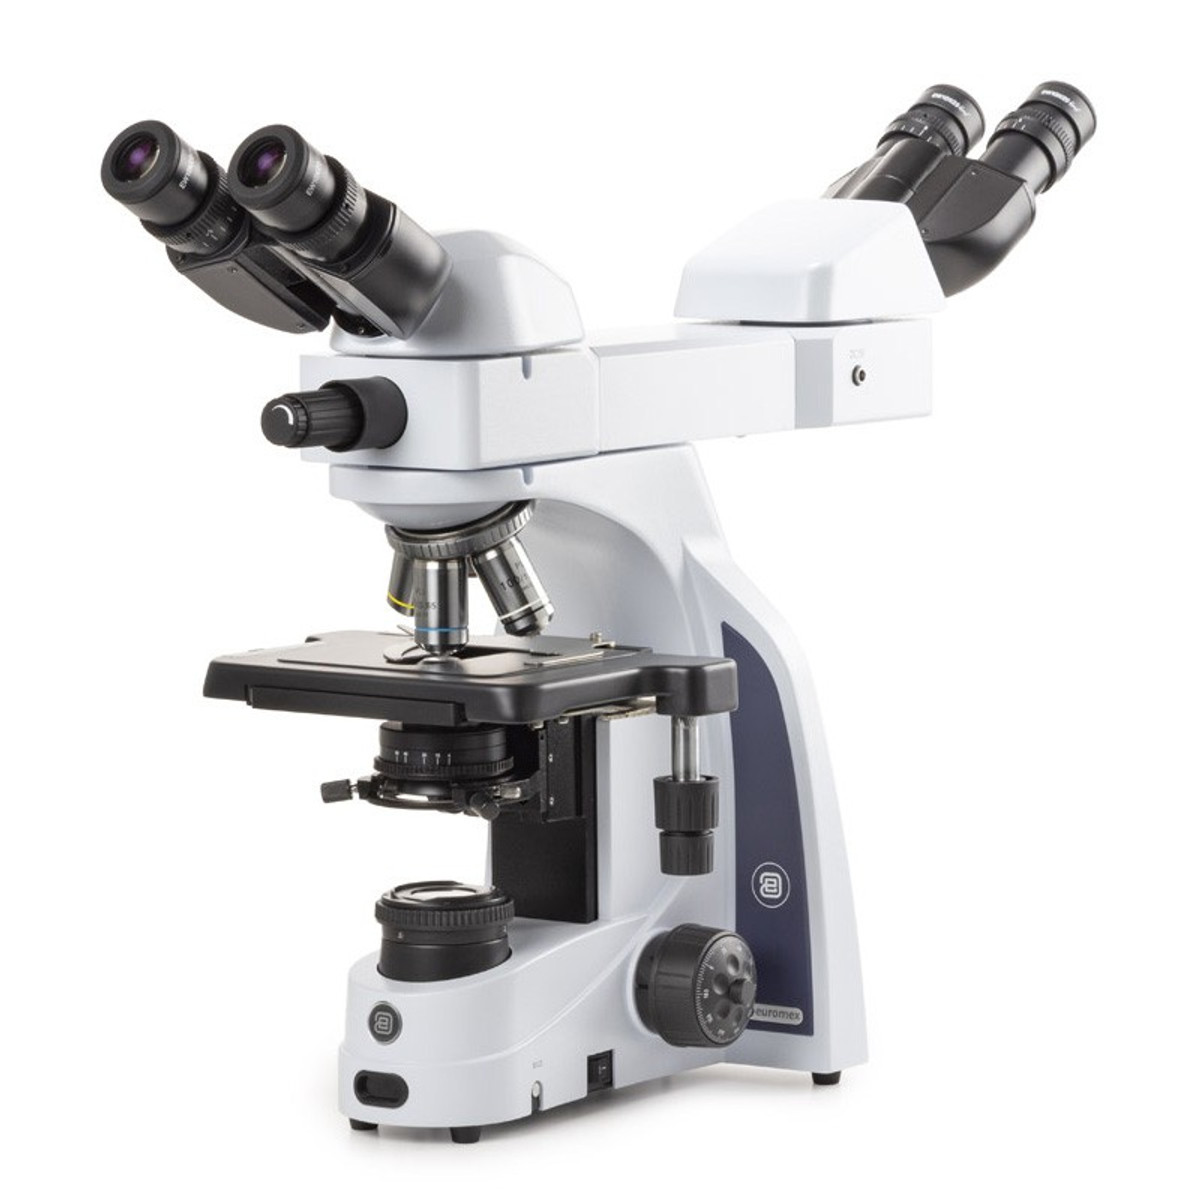 Euromex iScope Face-to-Face Microscope - E-Plan IOS Objectives